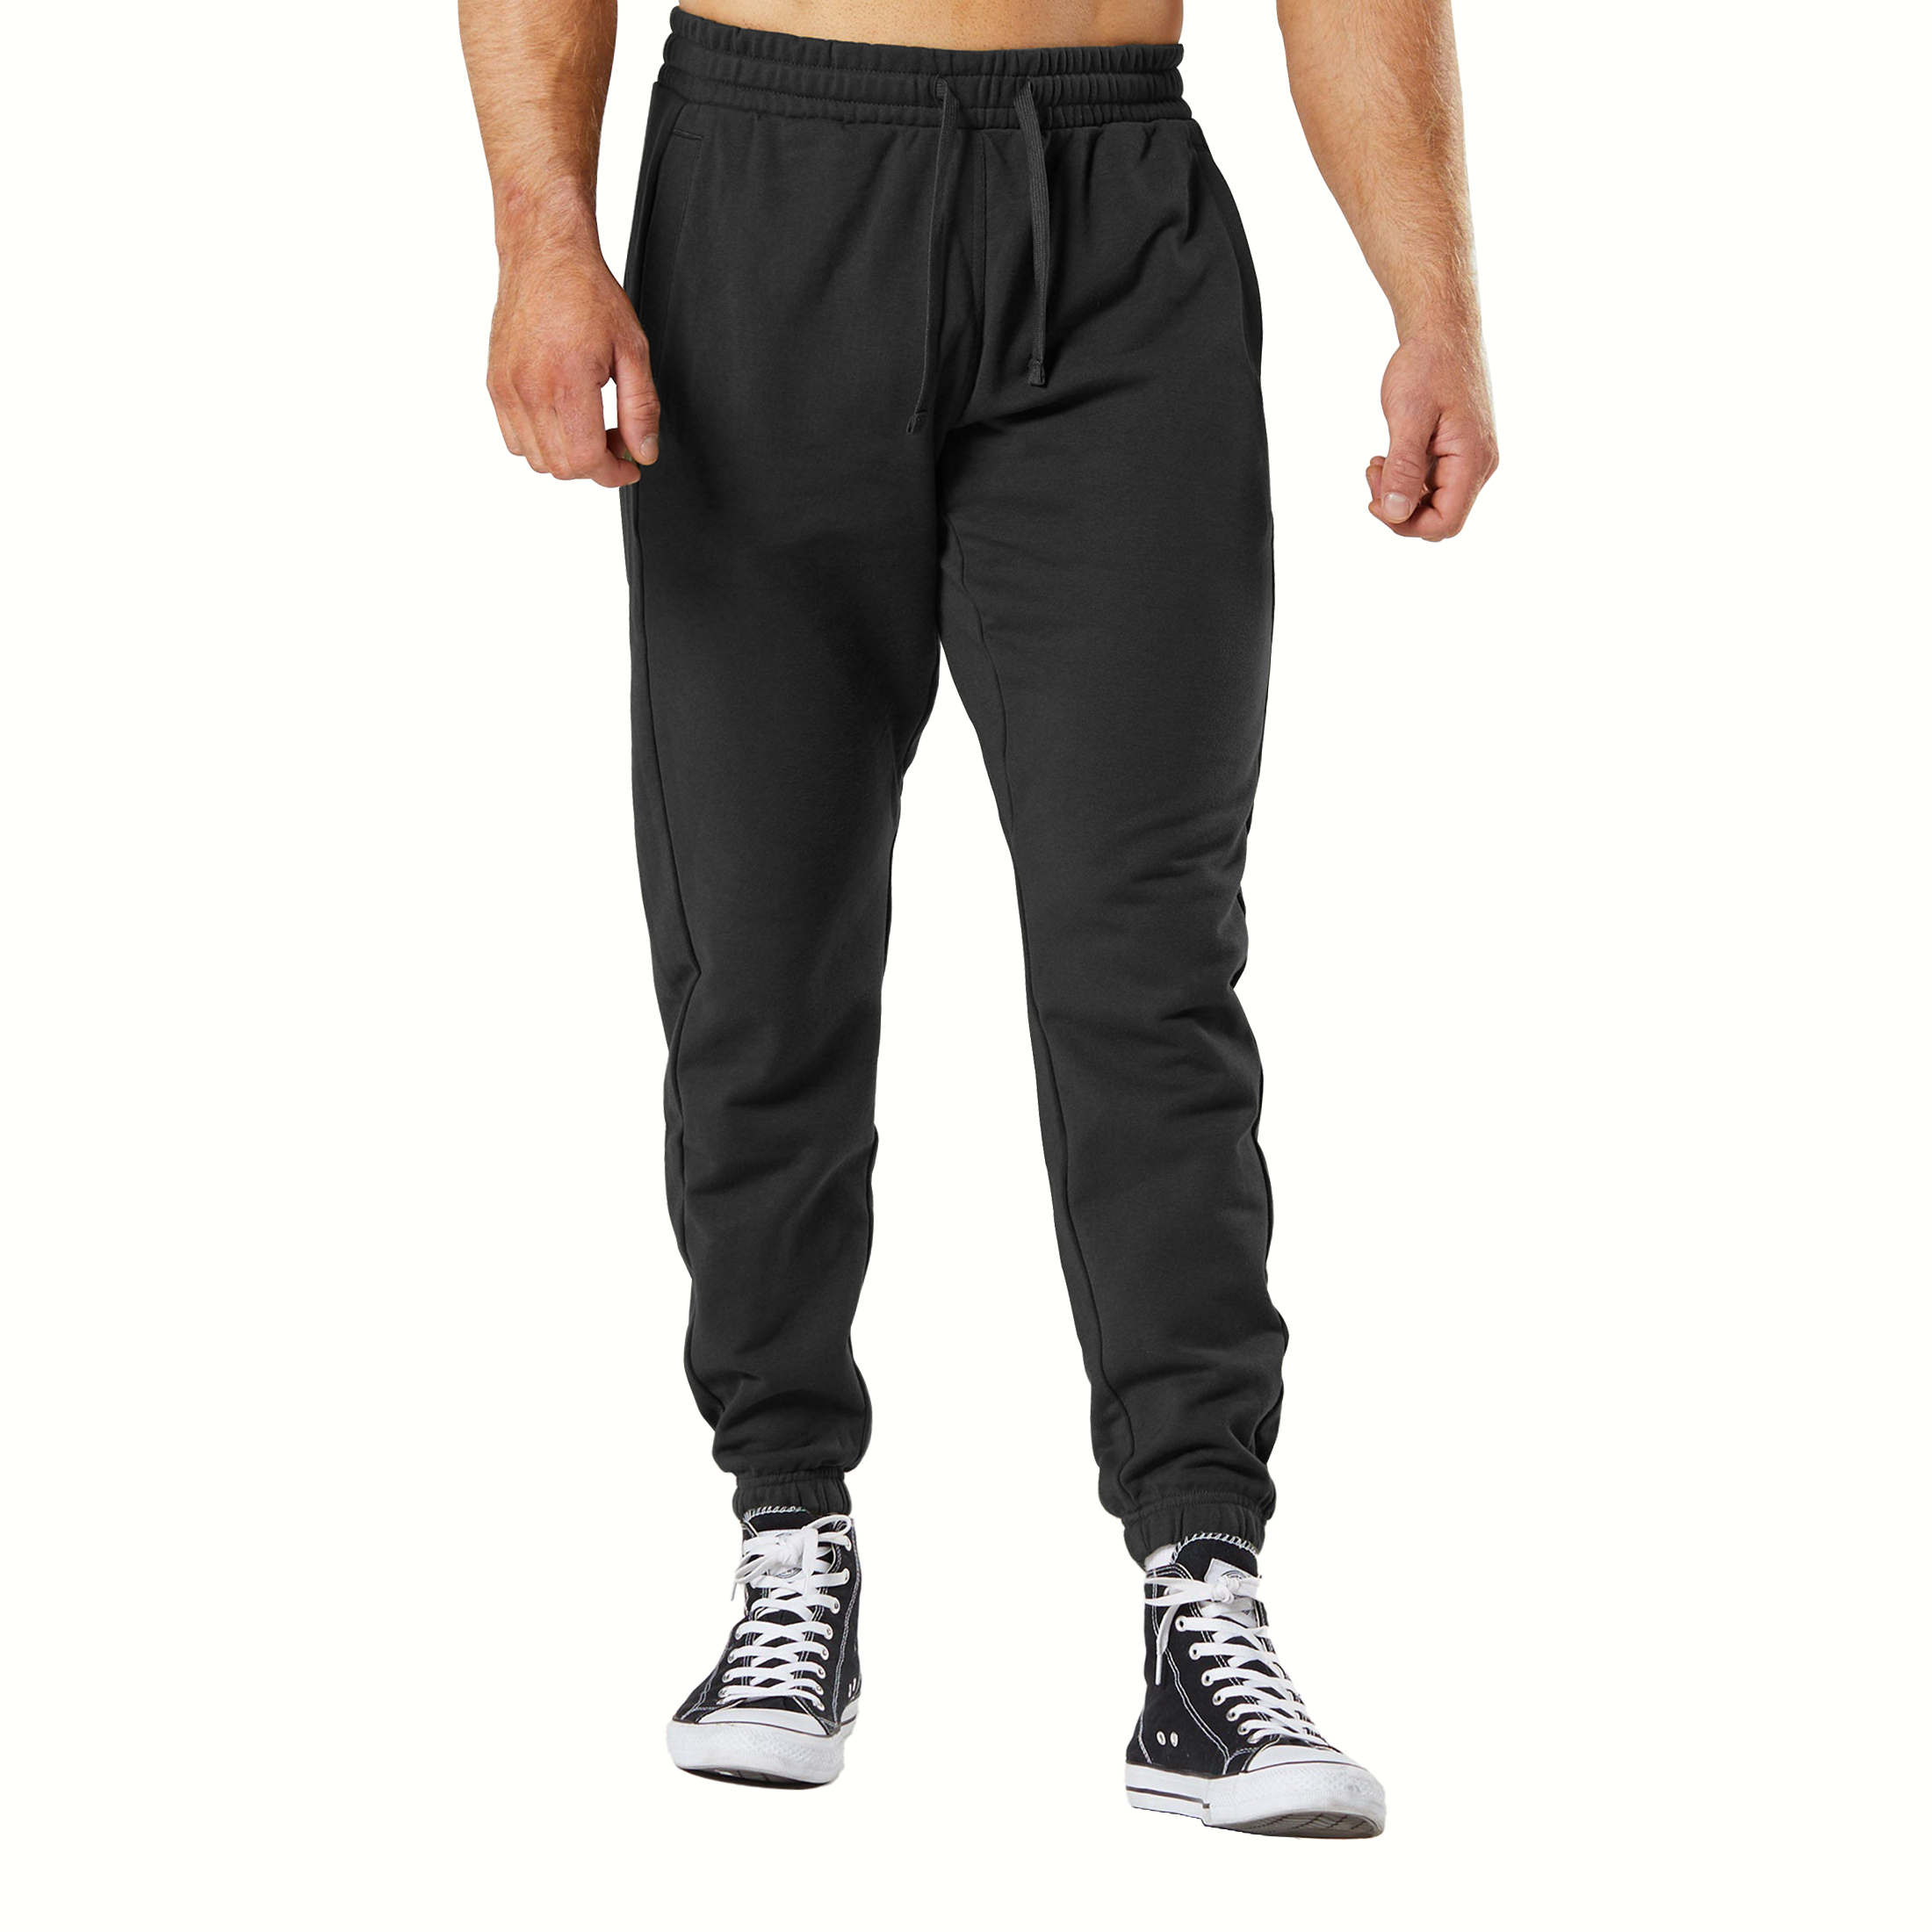 3-Pack: Men's Casual Fleece-Lined Elastic Bottom Sweatpants Jogger Pants With Pockets - Solid & Stripes, Large